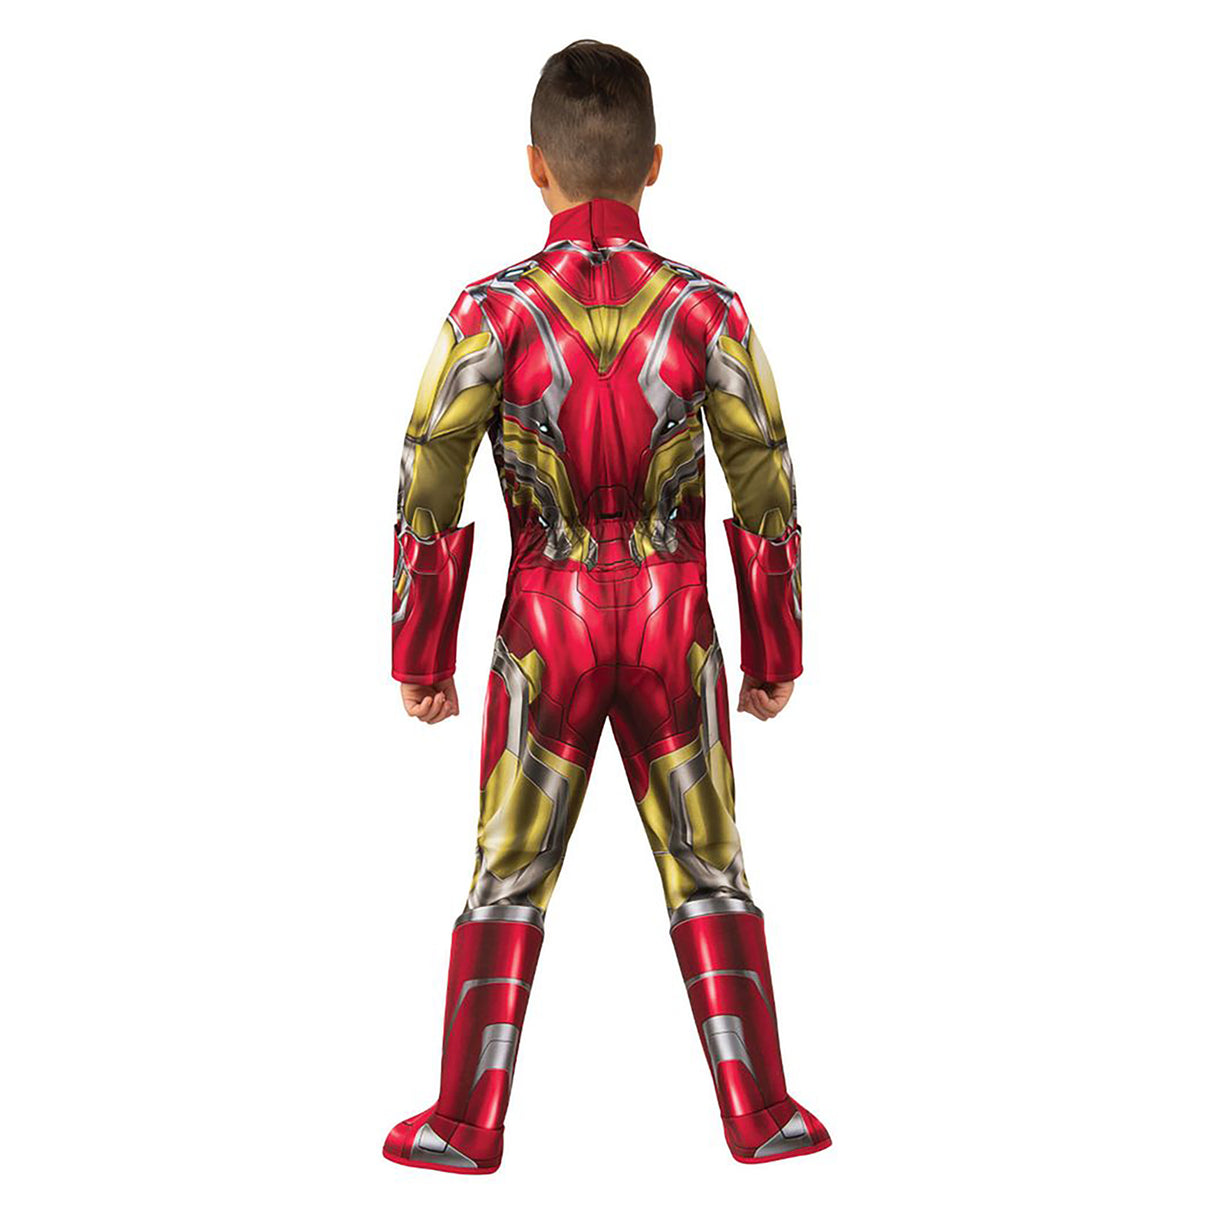 Rubies Iron Man Deluxe Costume, Red (3-5 years)